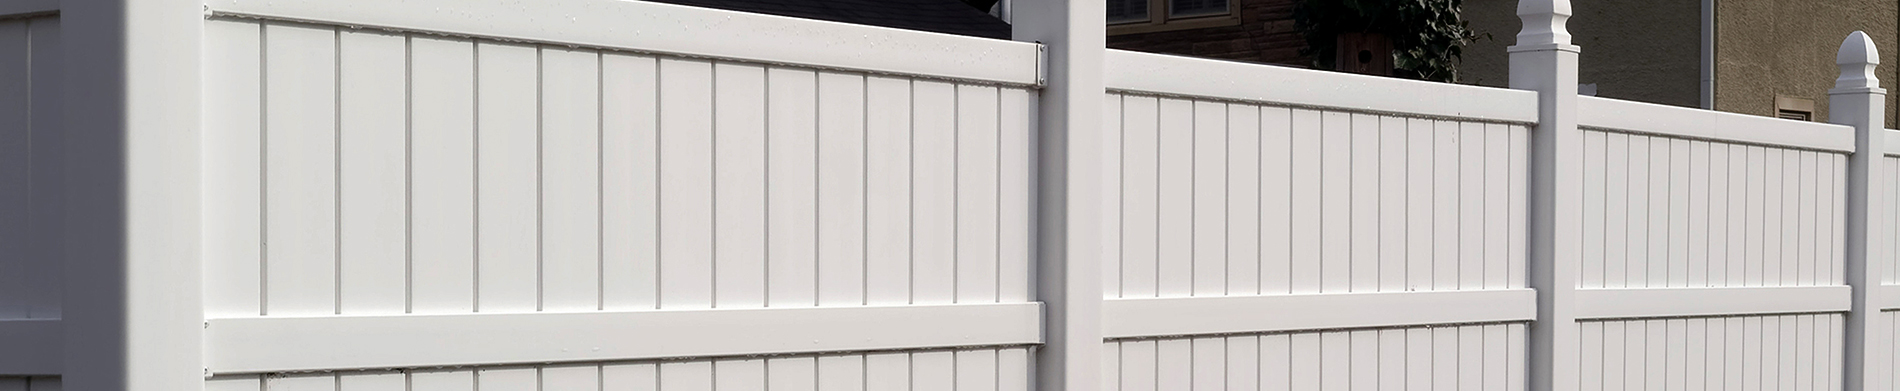 All You Need To Know About Vinyl Fences and Gates